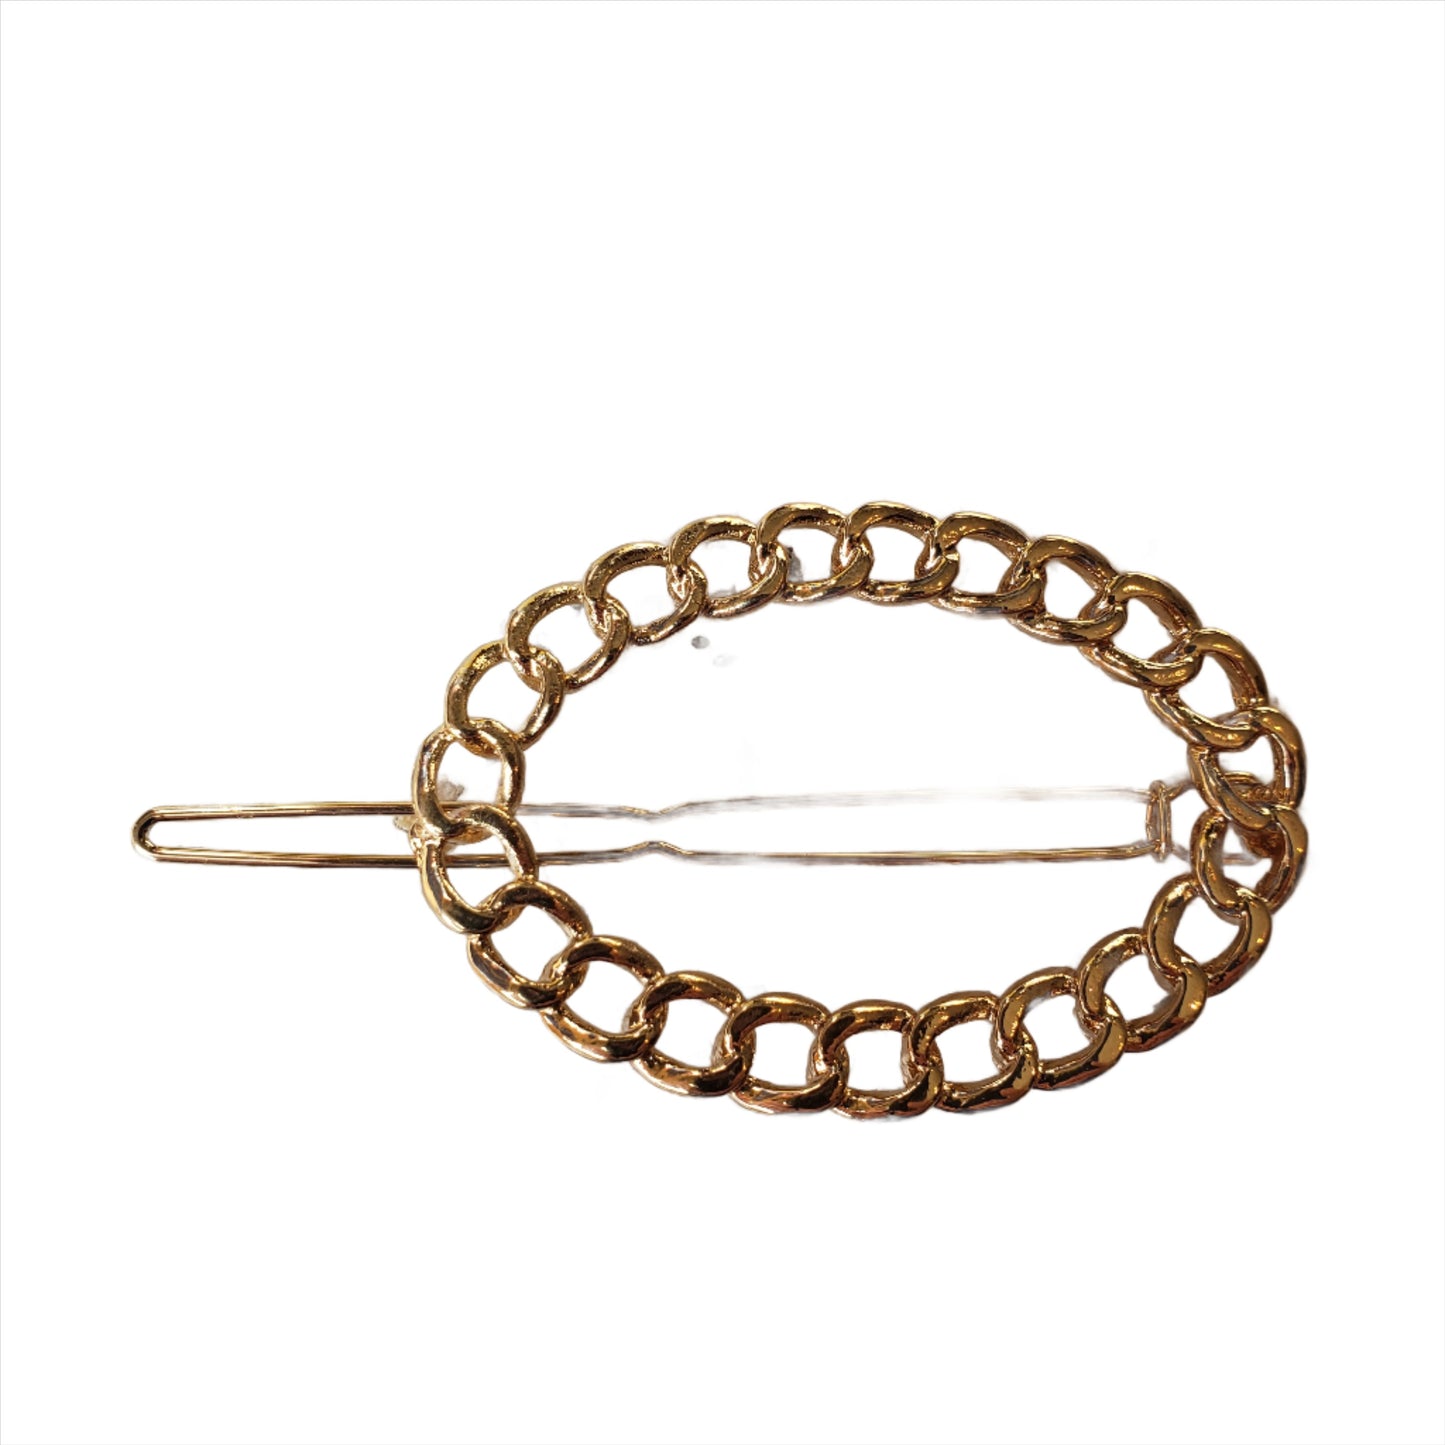 Hair Clip - Gold Oval Link